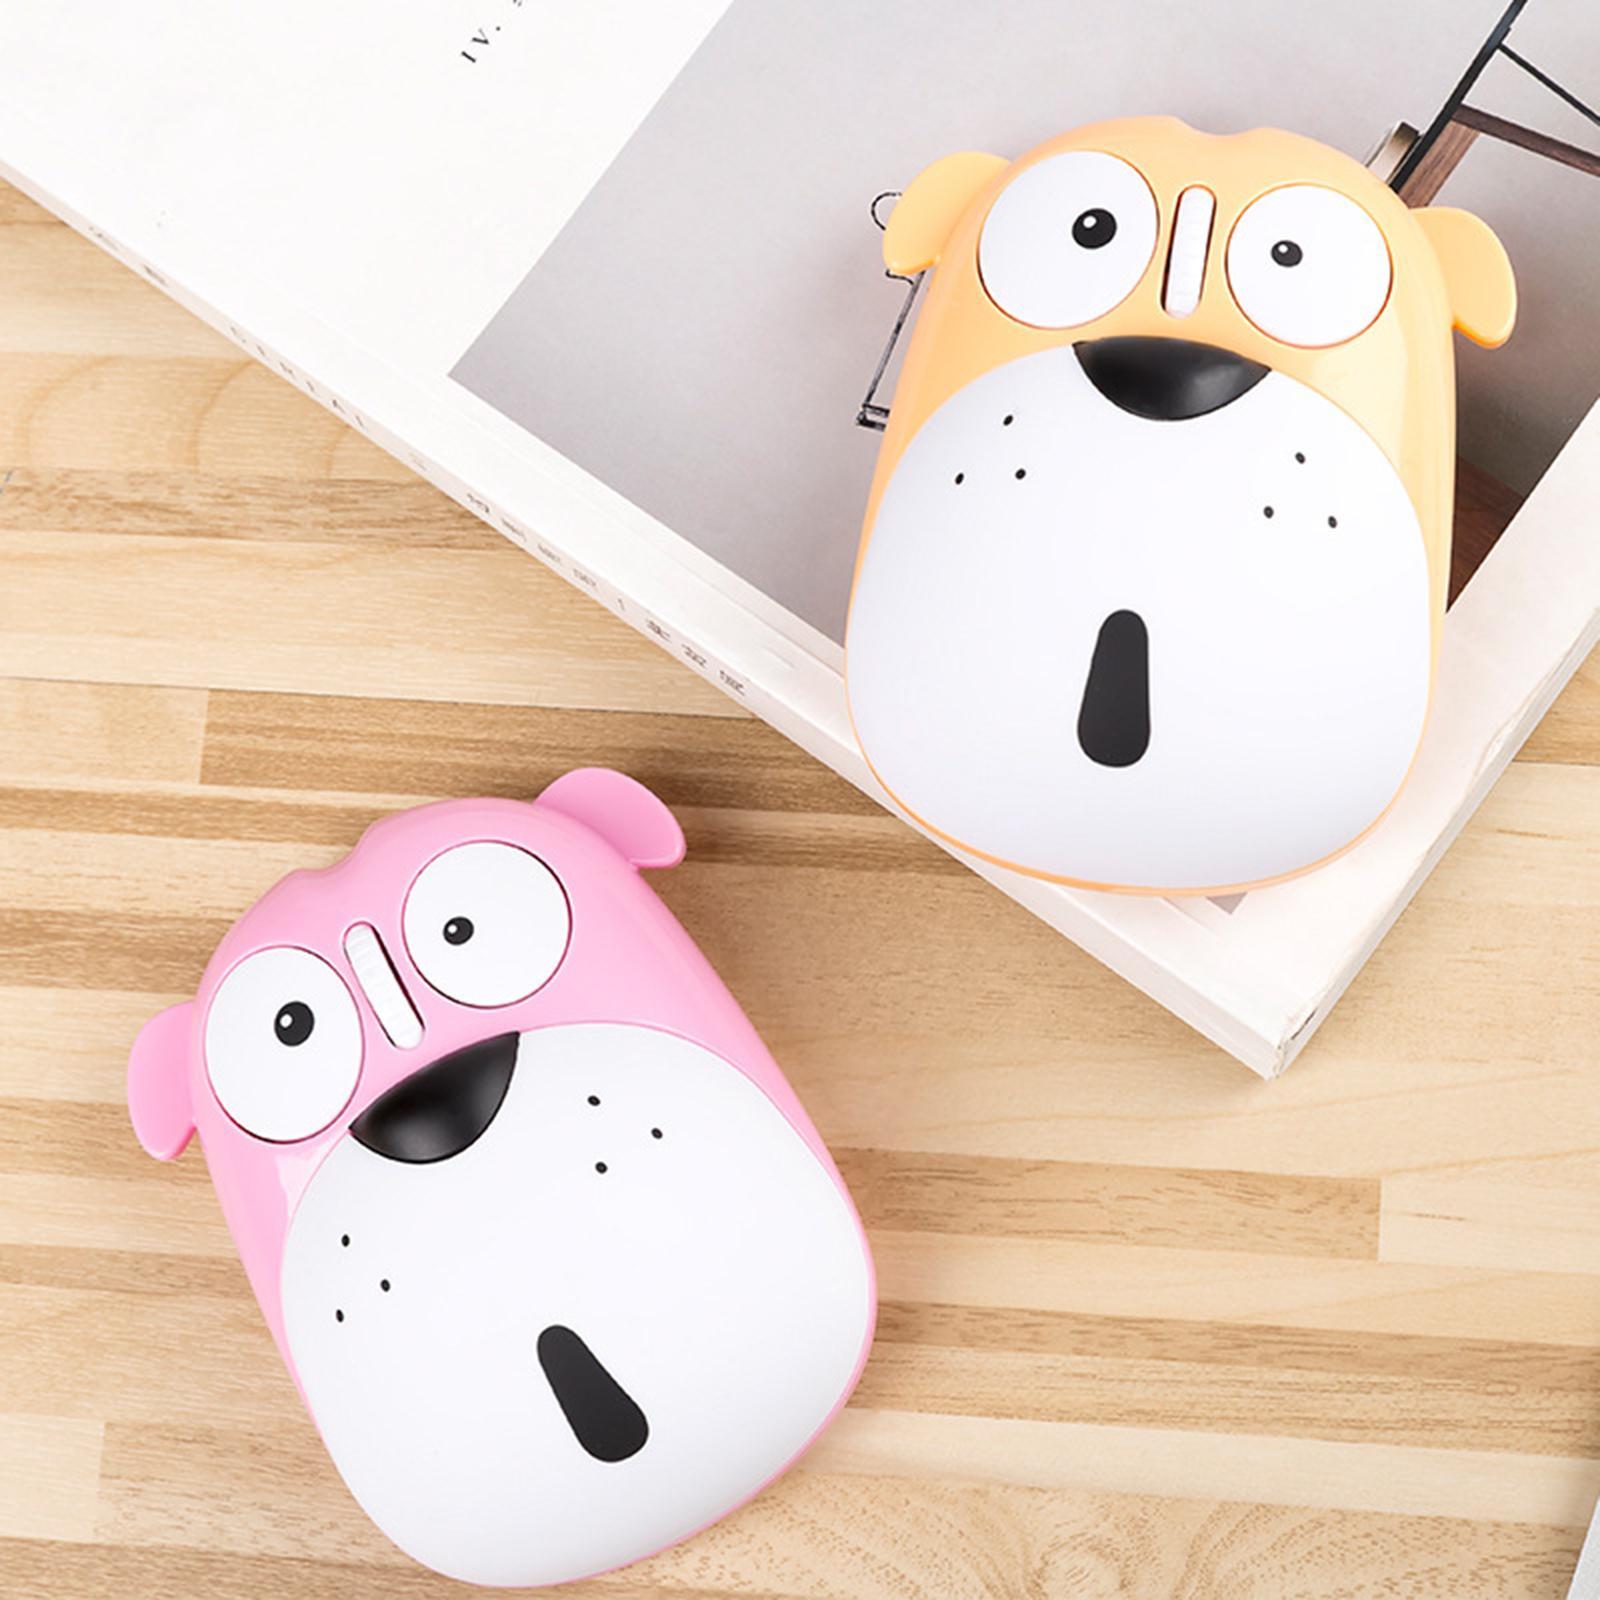 2.4G Wireless Mouse Dog Shape with USB Nano Receiver Animal for Office